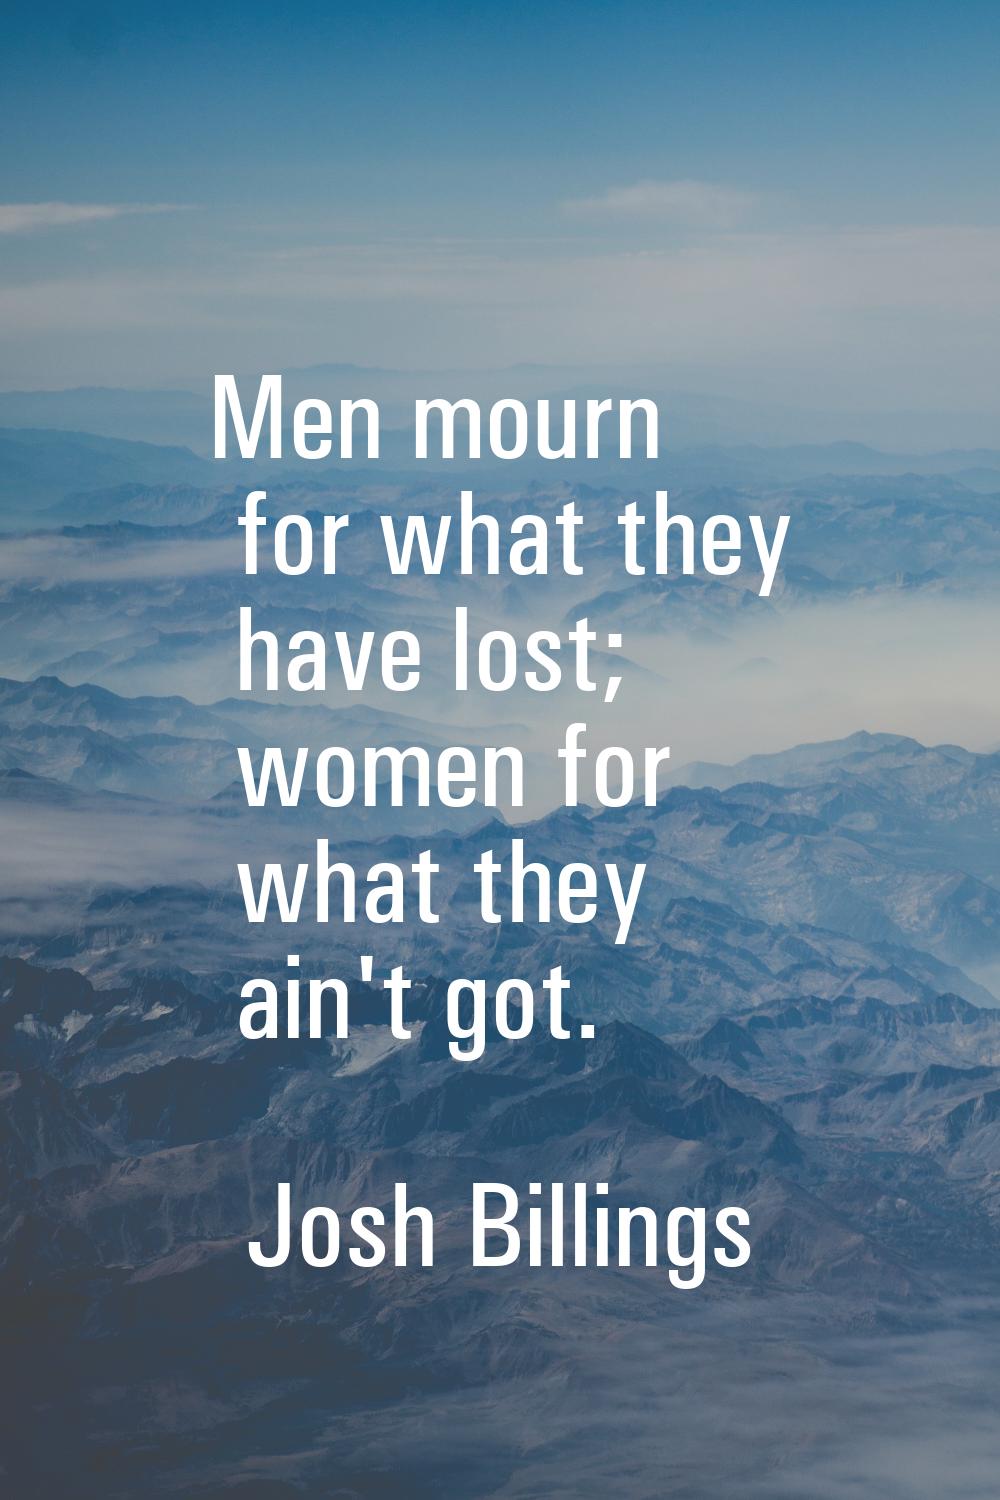 Men mourn for what they have lost; women for what they ain't got.